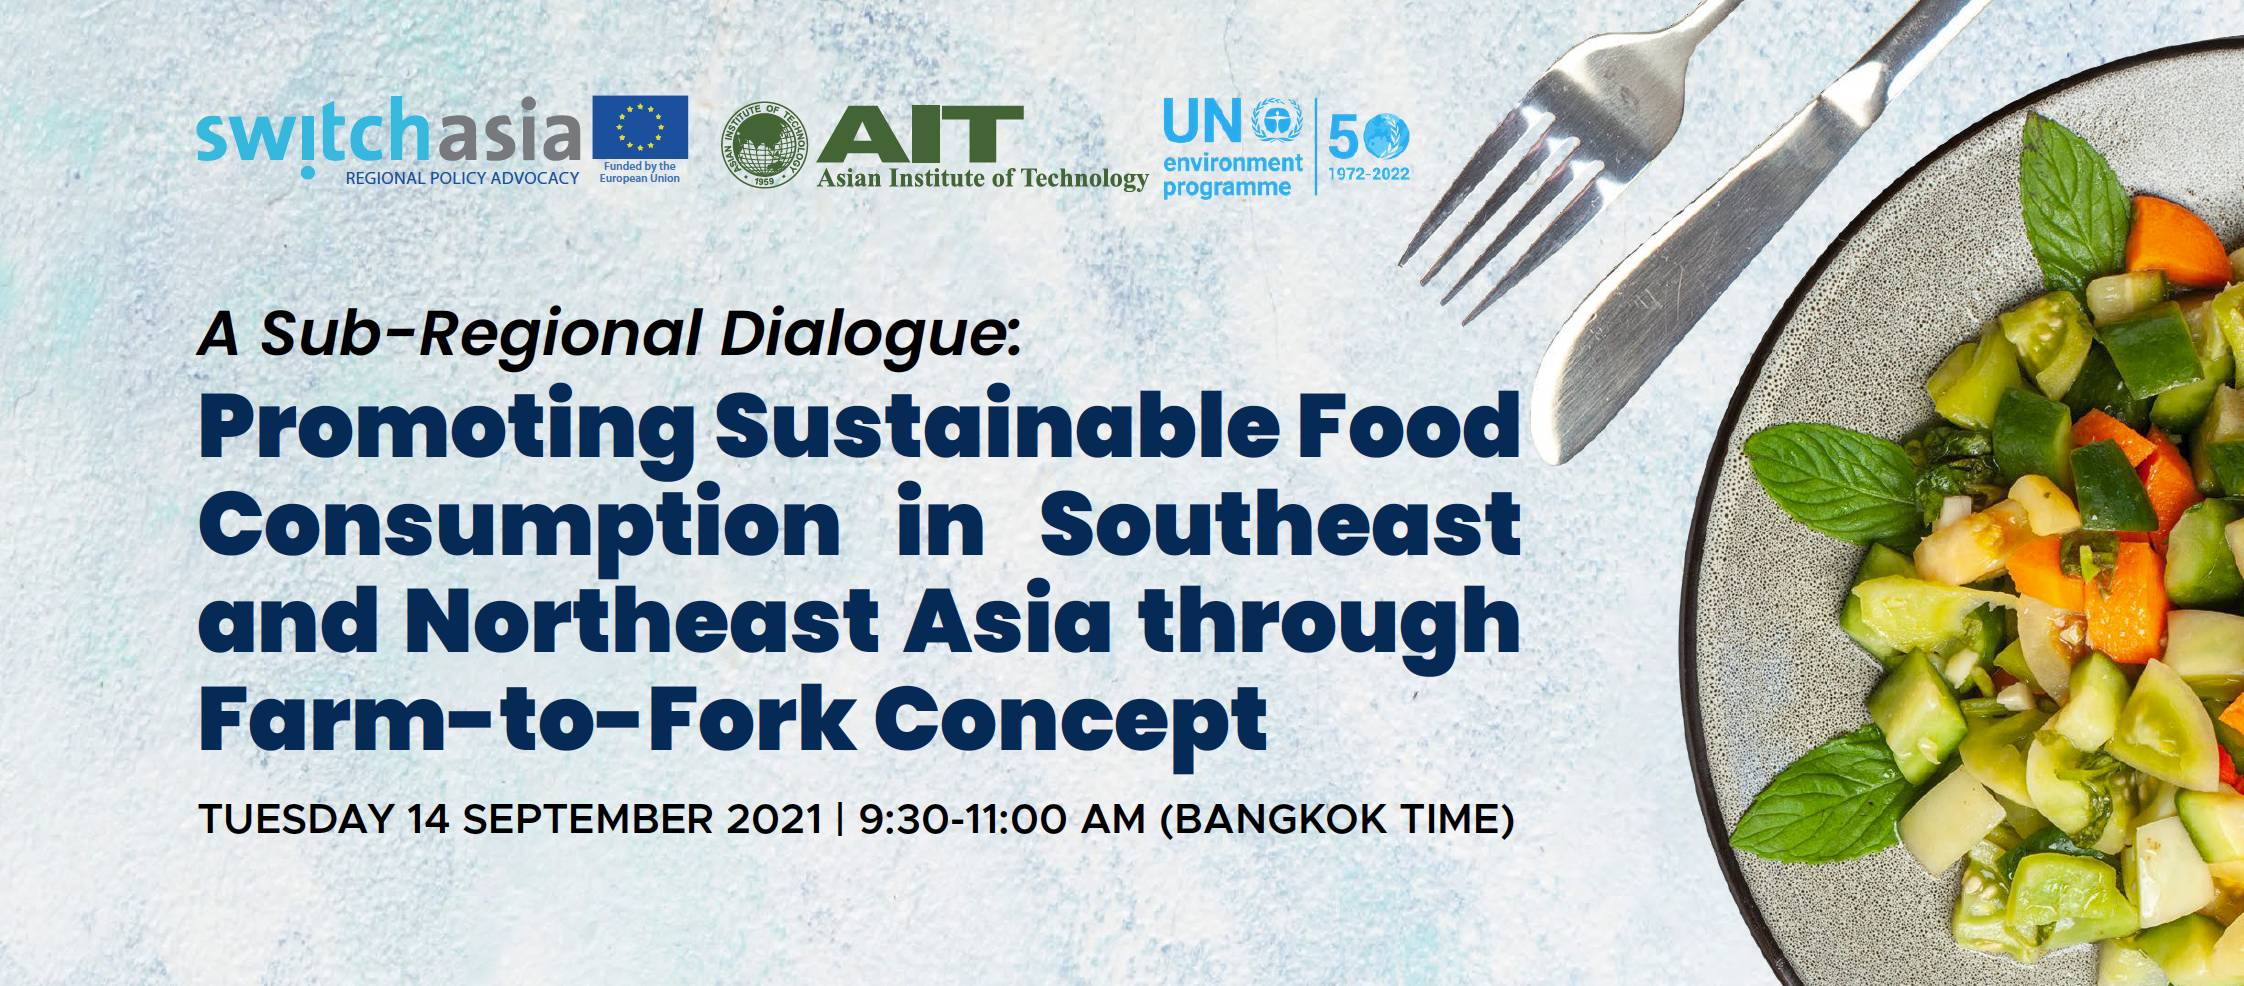 Promoting Sustainable Food Consumption in Southeast and Northeast Asia through Farm-to-Fork Concept